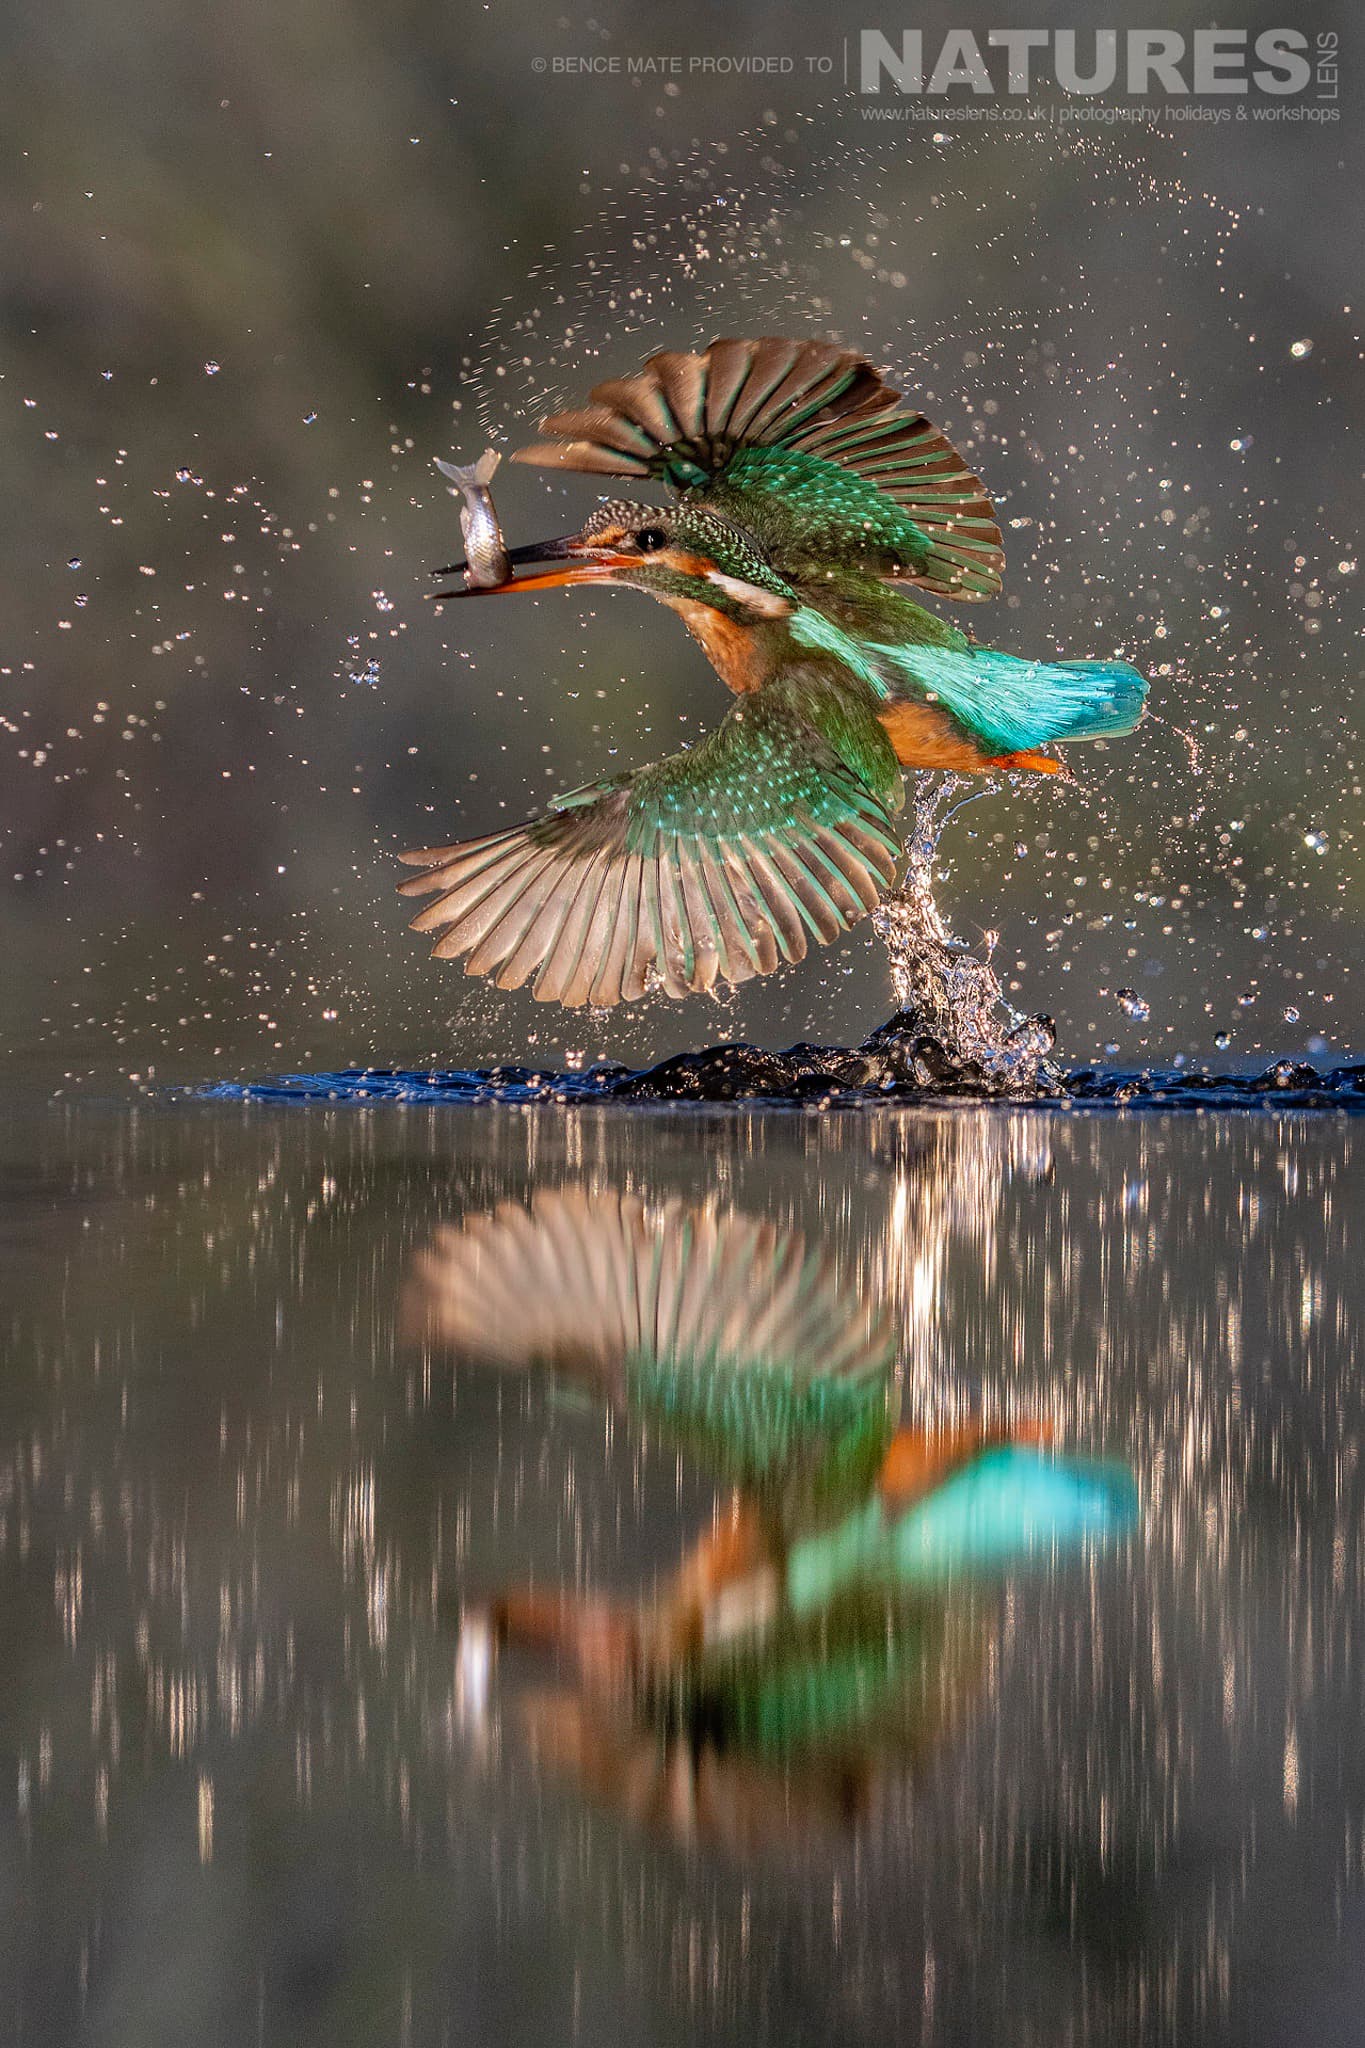 A kingfisher breaks free from the water at Bence Mátés Photography Hides during the Hungarian Winter